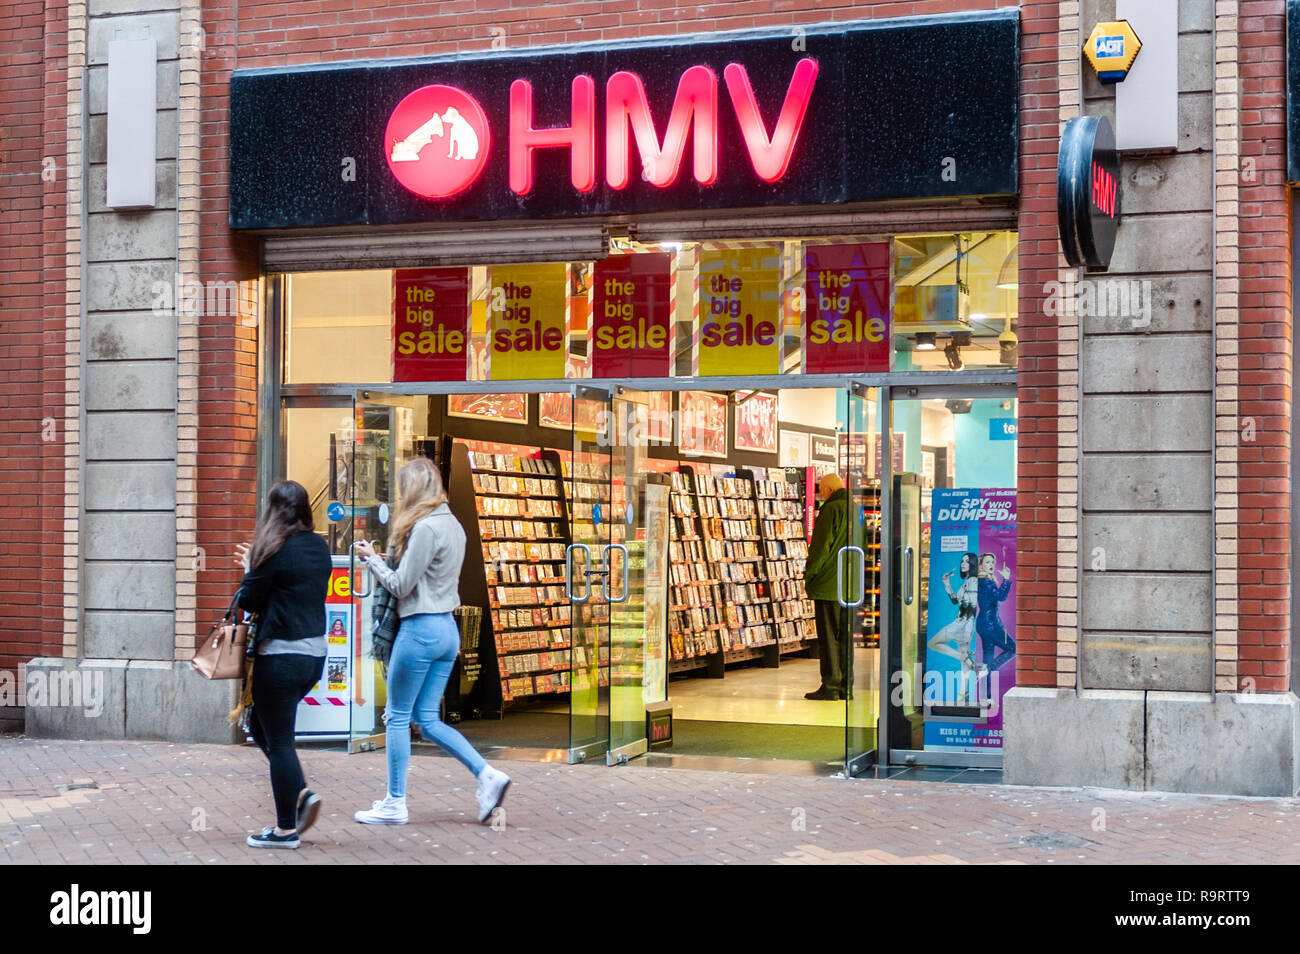 Blackpool, UK. 28th Dec, 2018. Shoppers pass HMV in Blackpool as the national chain is facing administration this week, putting 2,200 jobs at risk. The chain, which operates 130 stores, has fallen victim of online streaming services. Credit: AG News/Alamy Live News Stock Photo